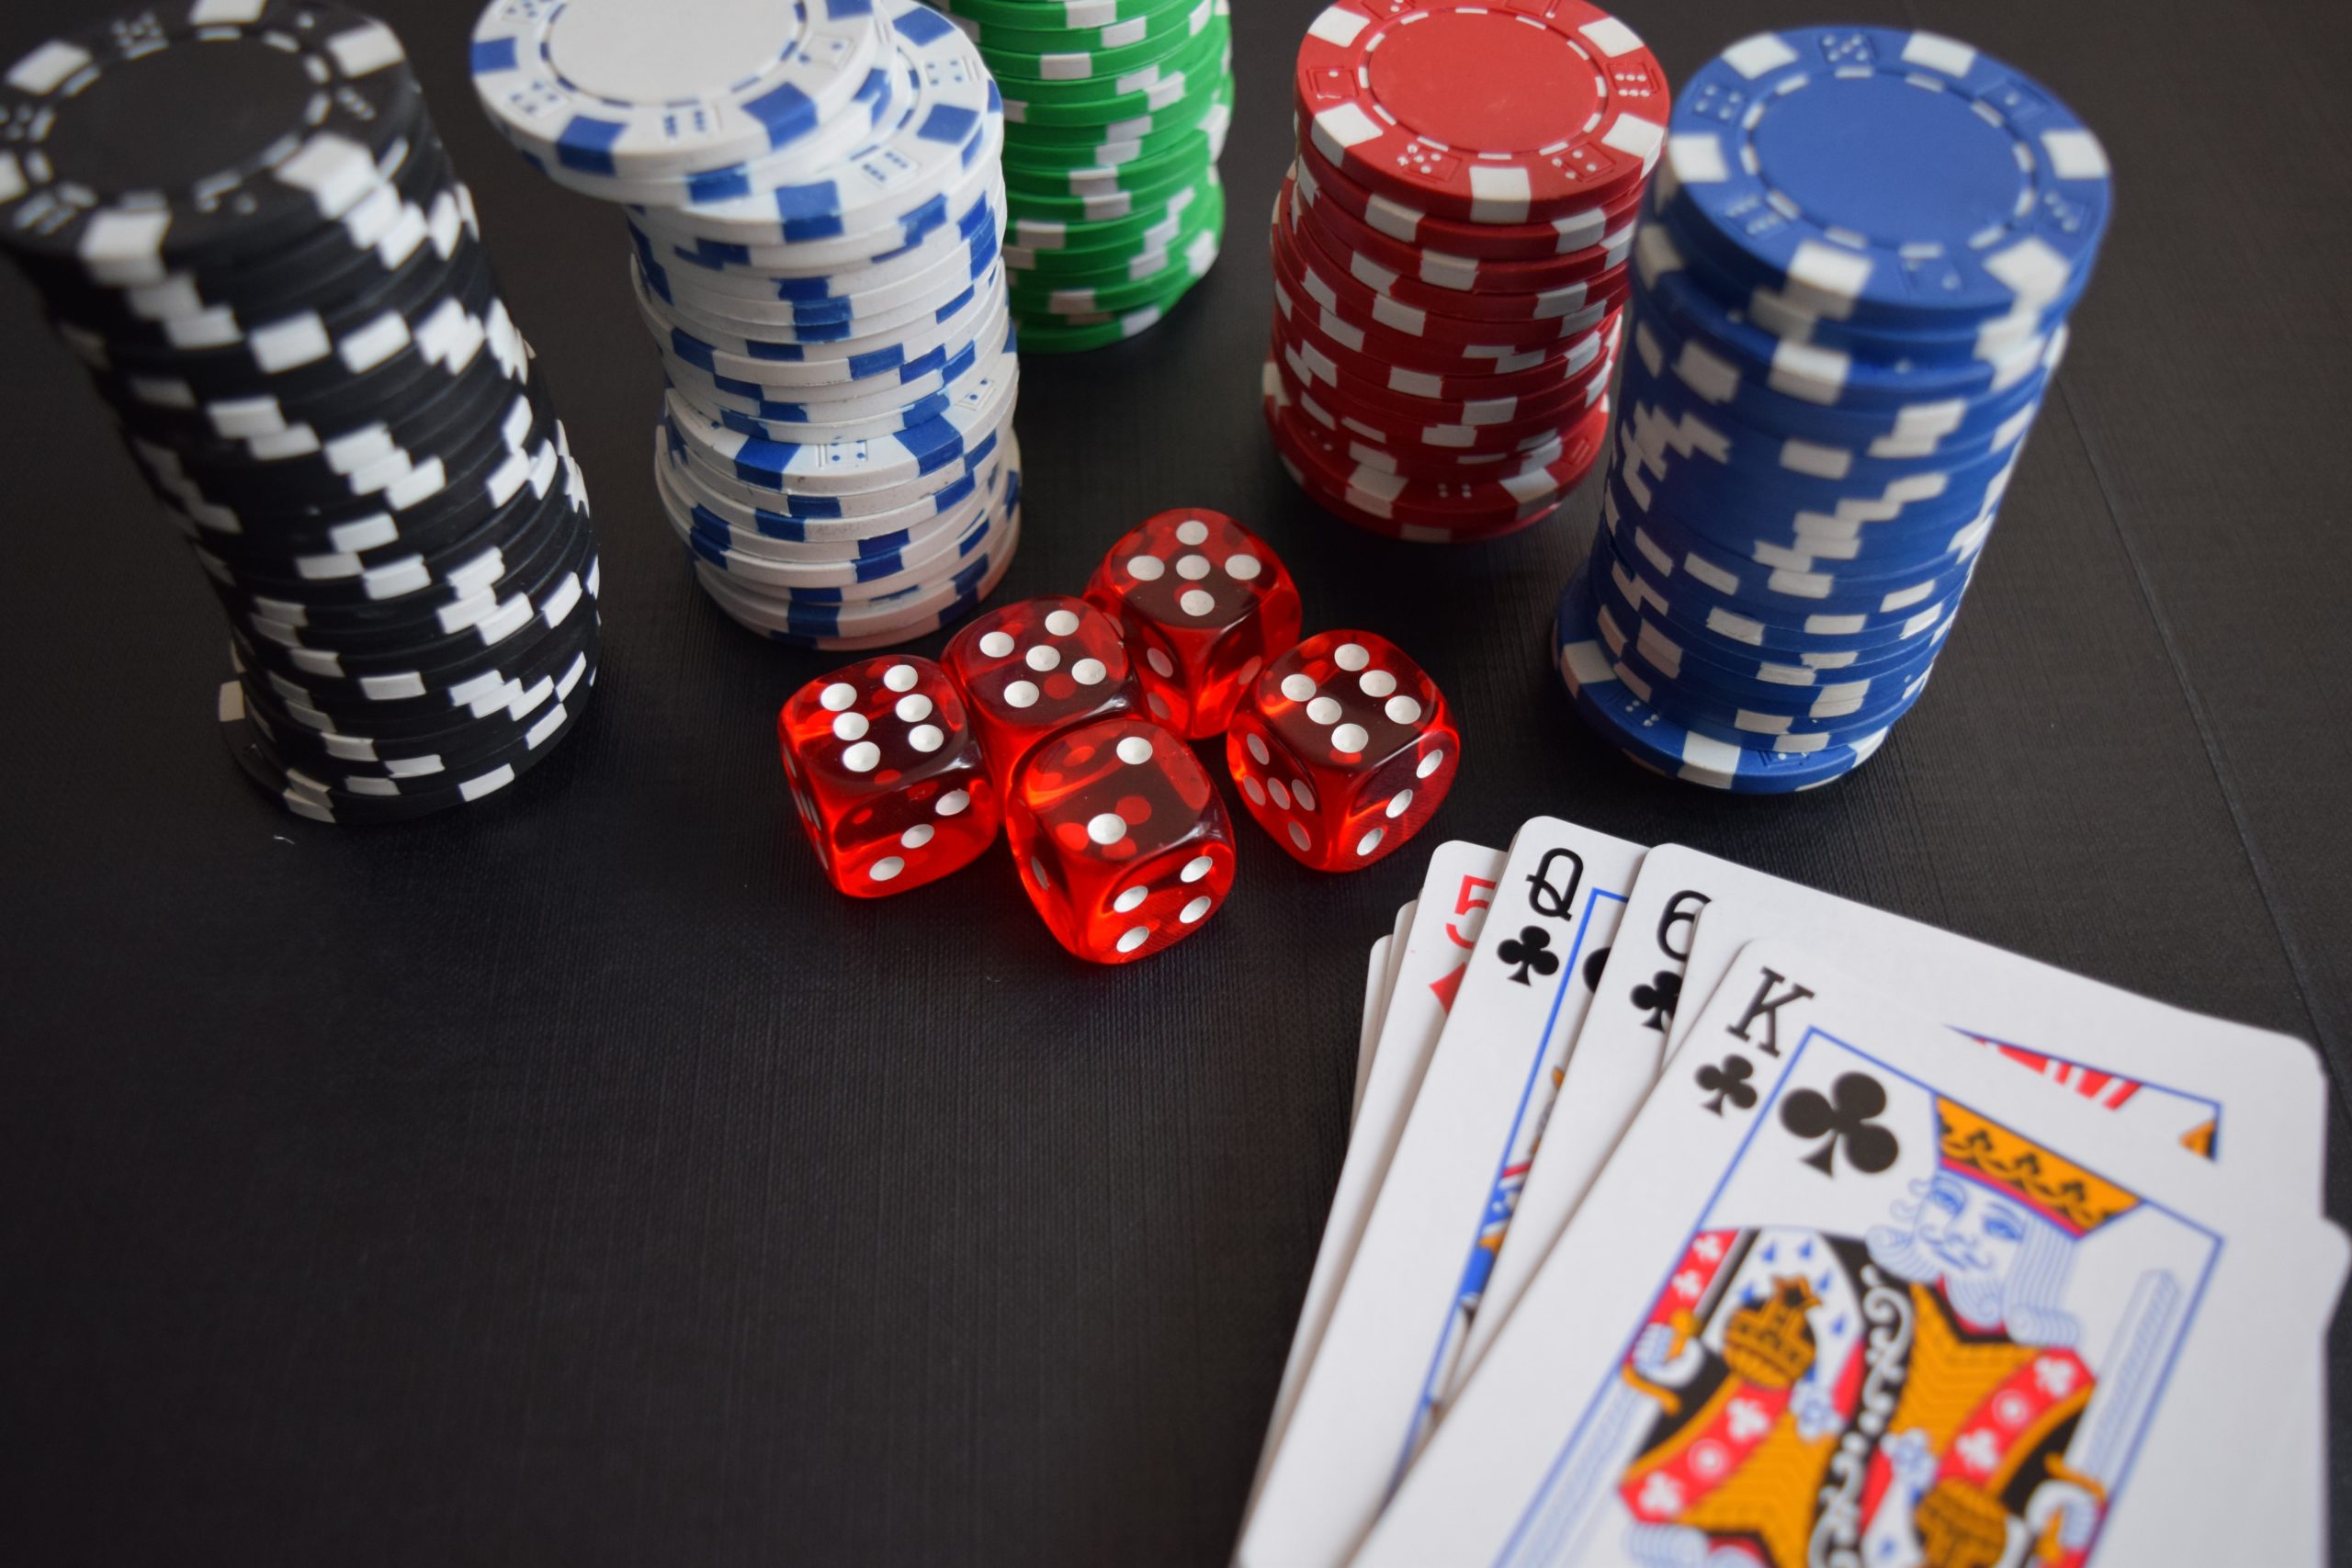 Glossary of Poker Terms